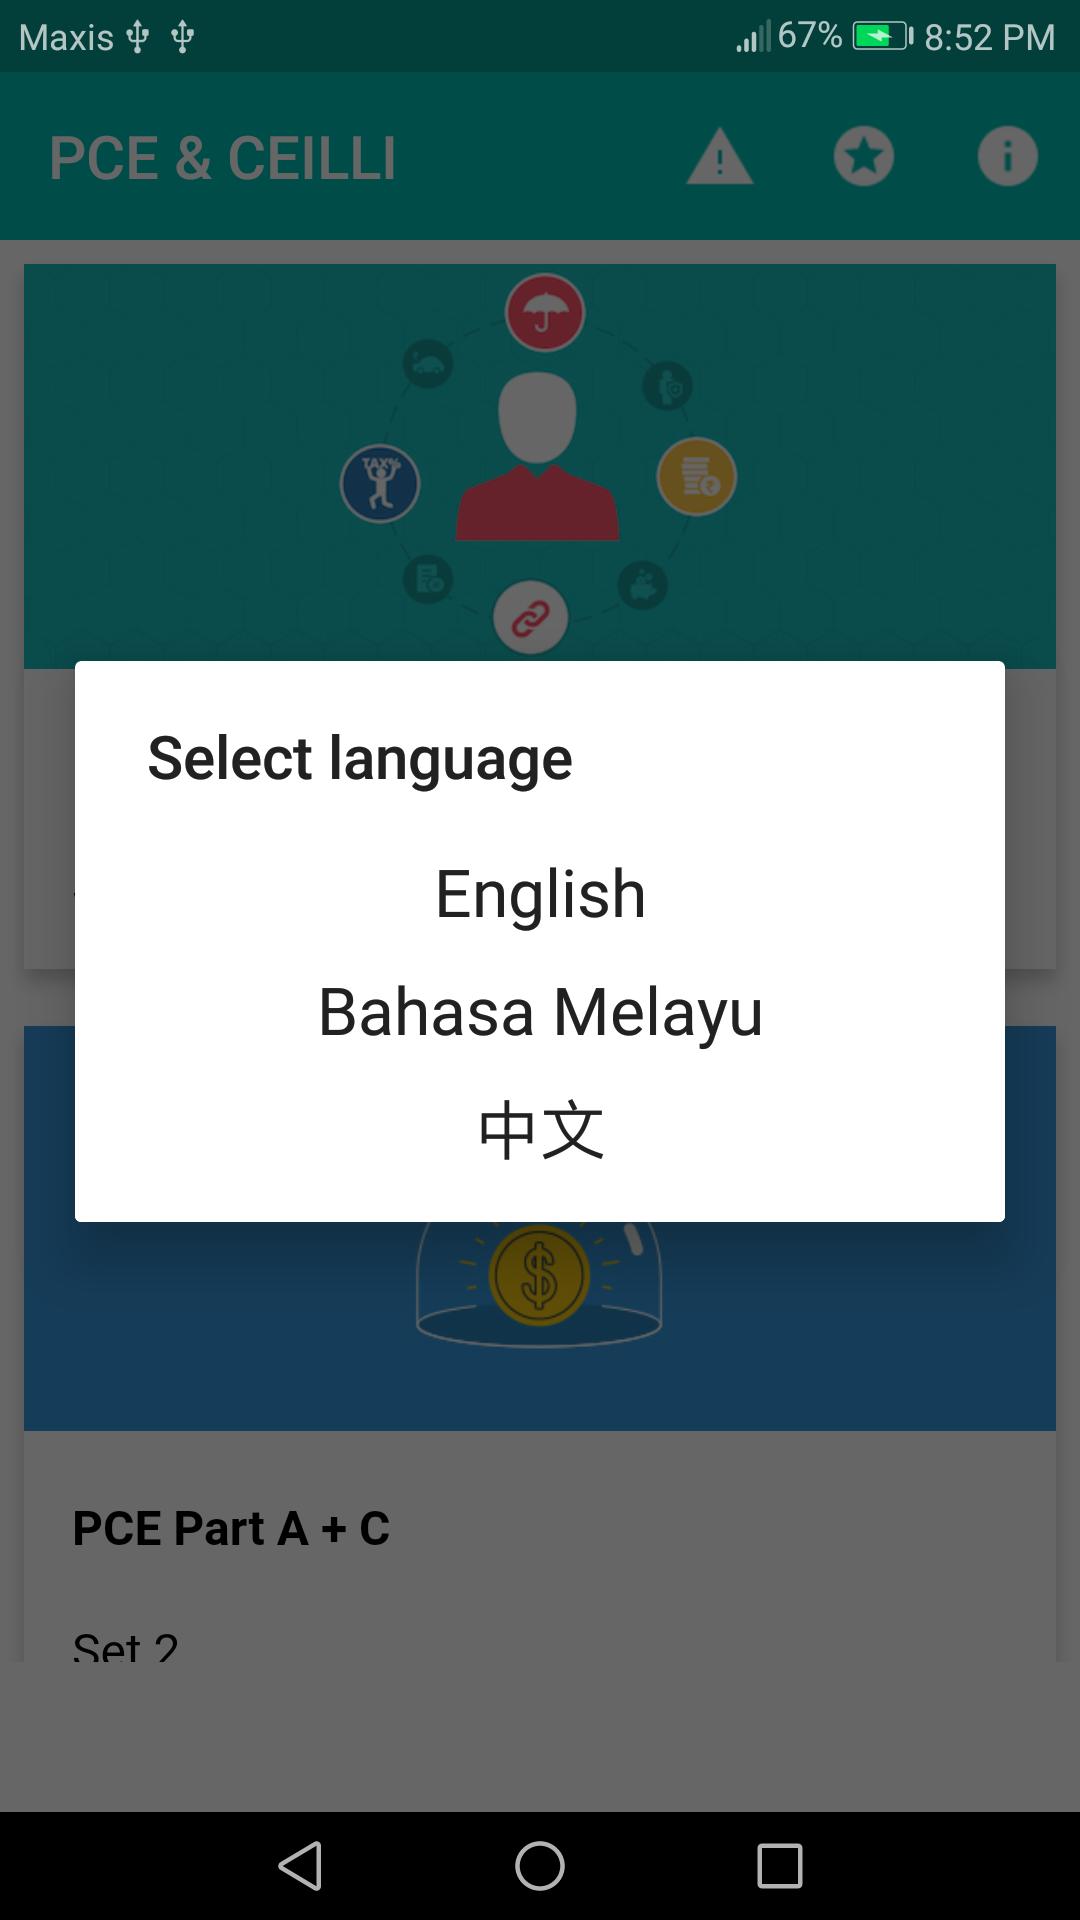 PCE and CEILLI Exam Questions Malaysia for Android - APK Download